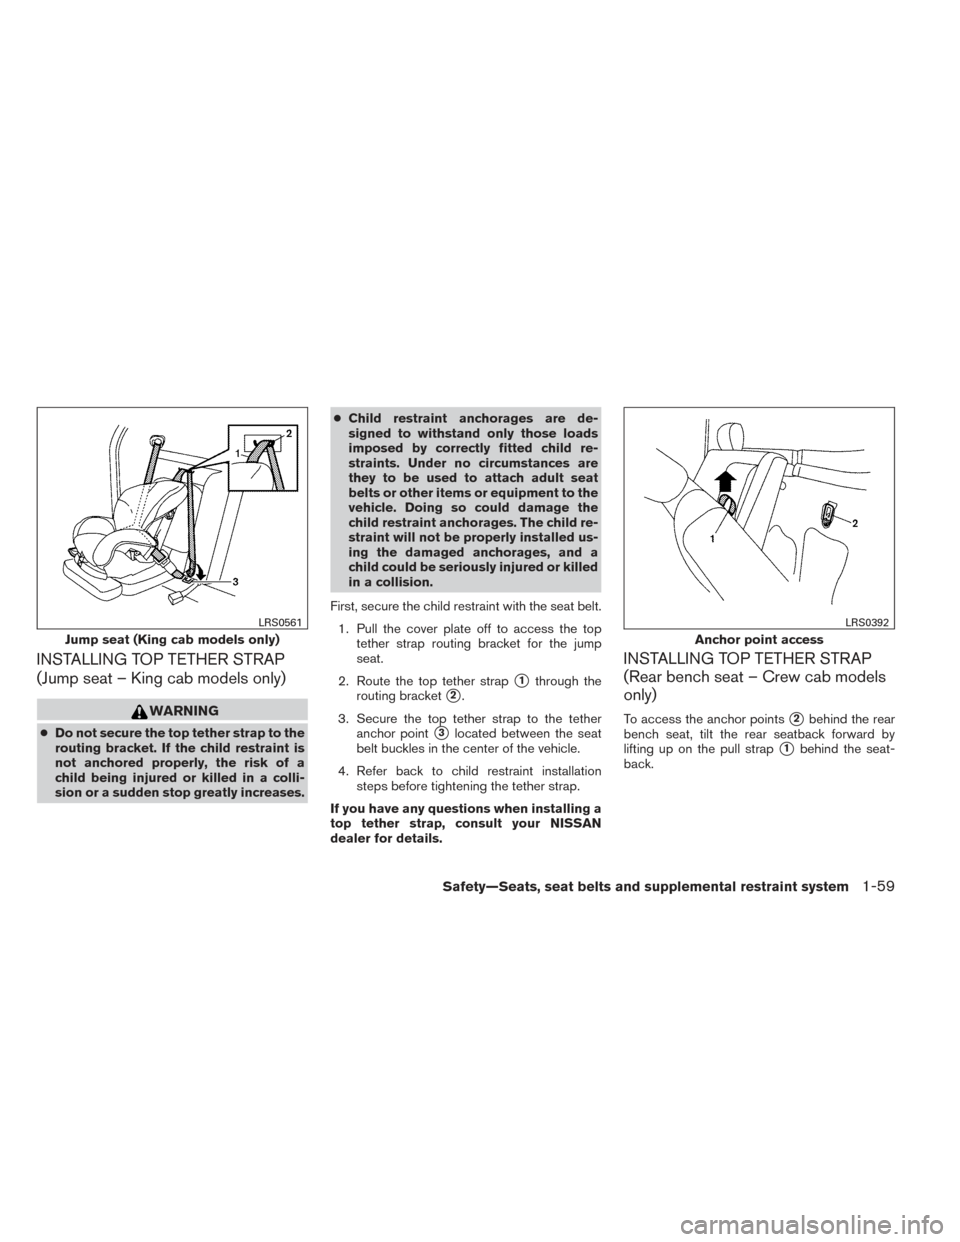 NISSAN FRONTIER 2014 D23 / 3.G Service Manual INSTALLING TOP TETHER STRAP
(Jump seat – King cab models only)
WARNING
●Do not secure the top tether strap to the
routing bracket. If the child restraint is
not anchored properly, the risk of a
ch